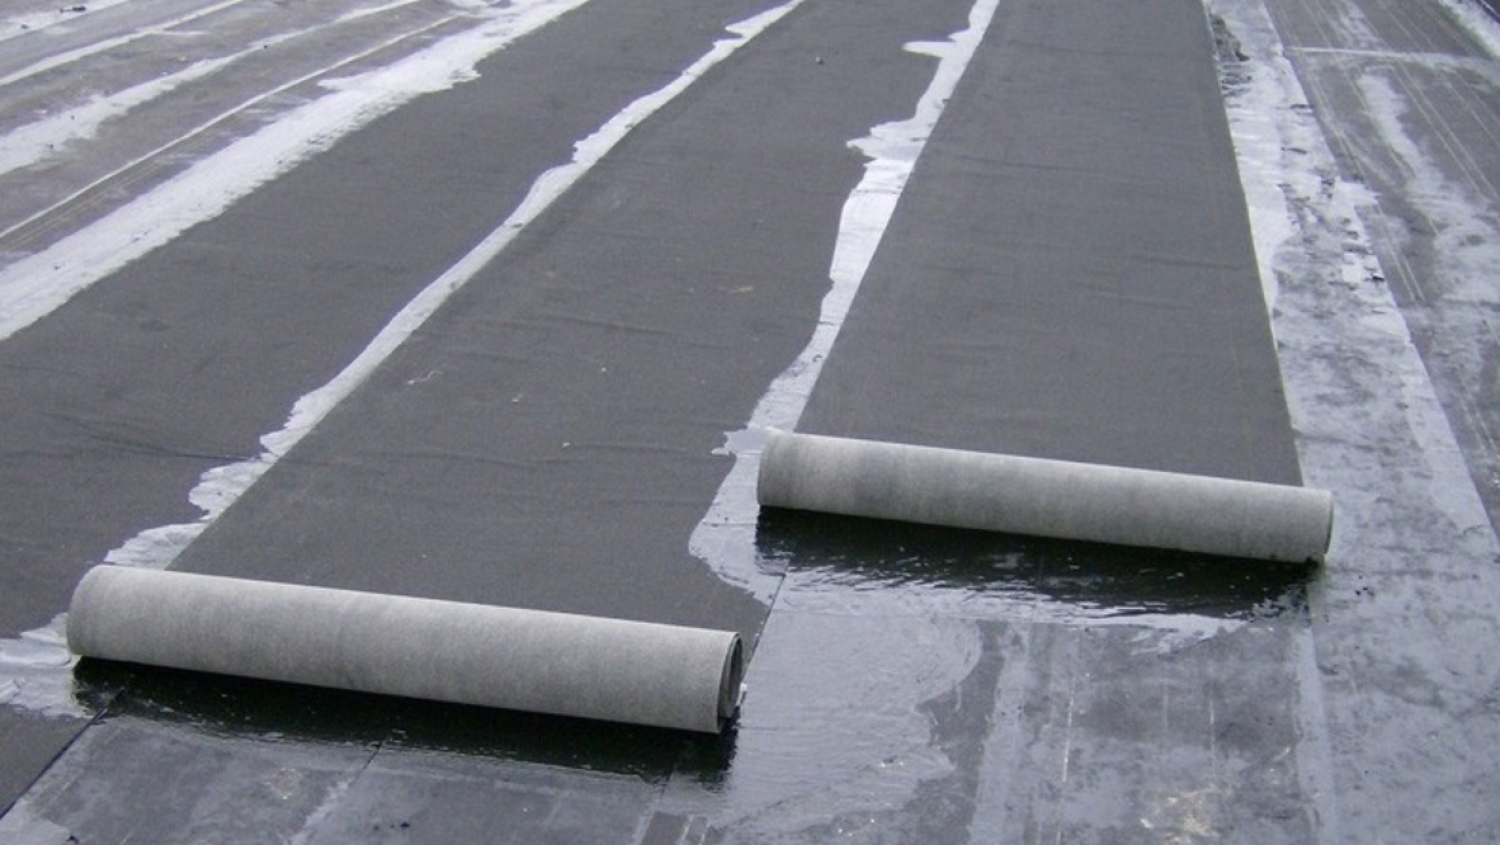 https://capitolcityroofing.com/files/2020/10/modified_bitumen.png?w=1600&a=t